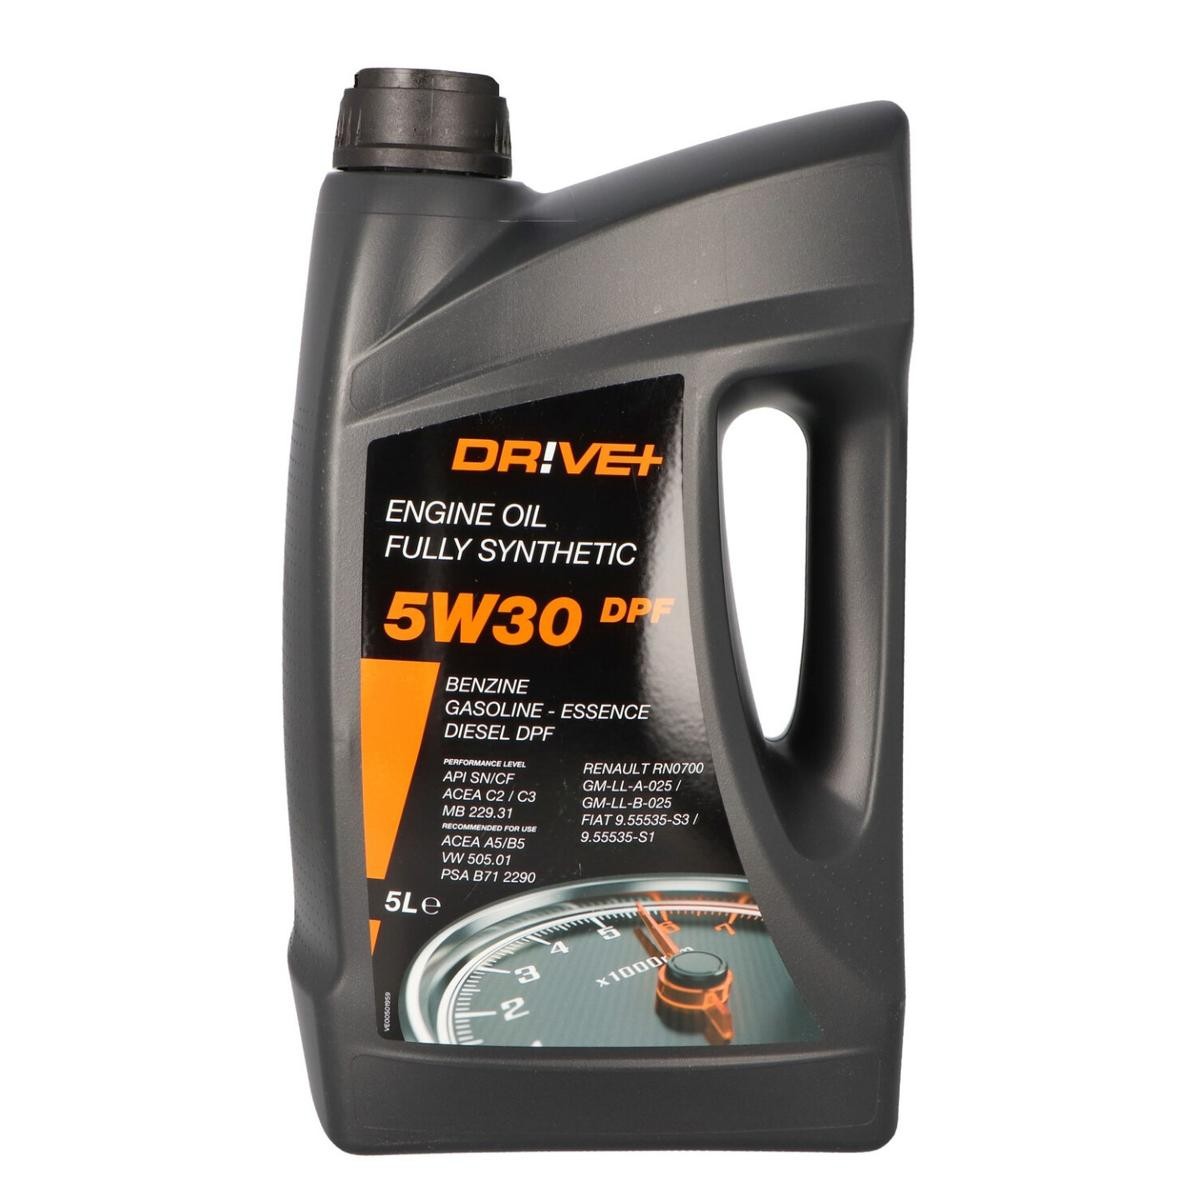 Dr!ve+ DP3310.10.182 Engine oil VW experience and price